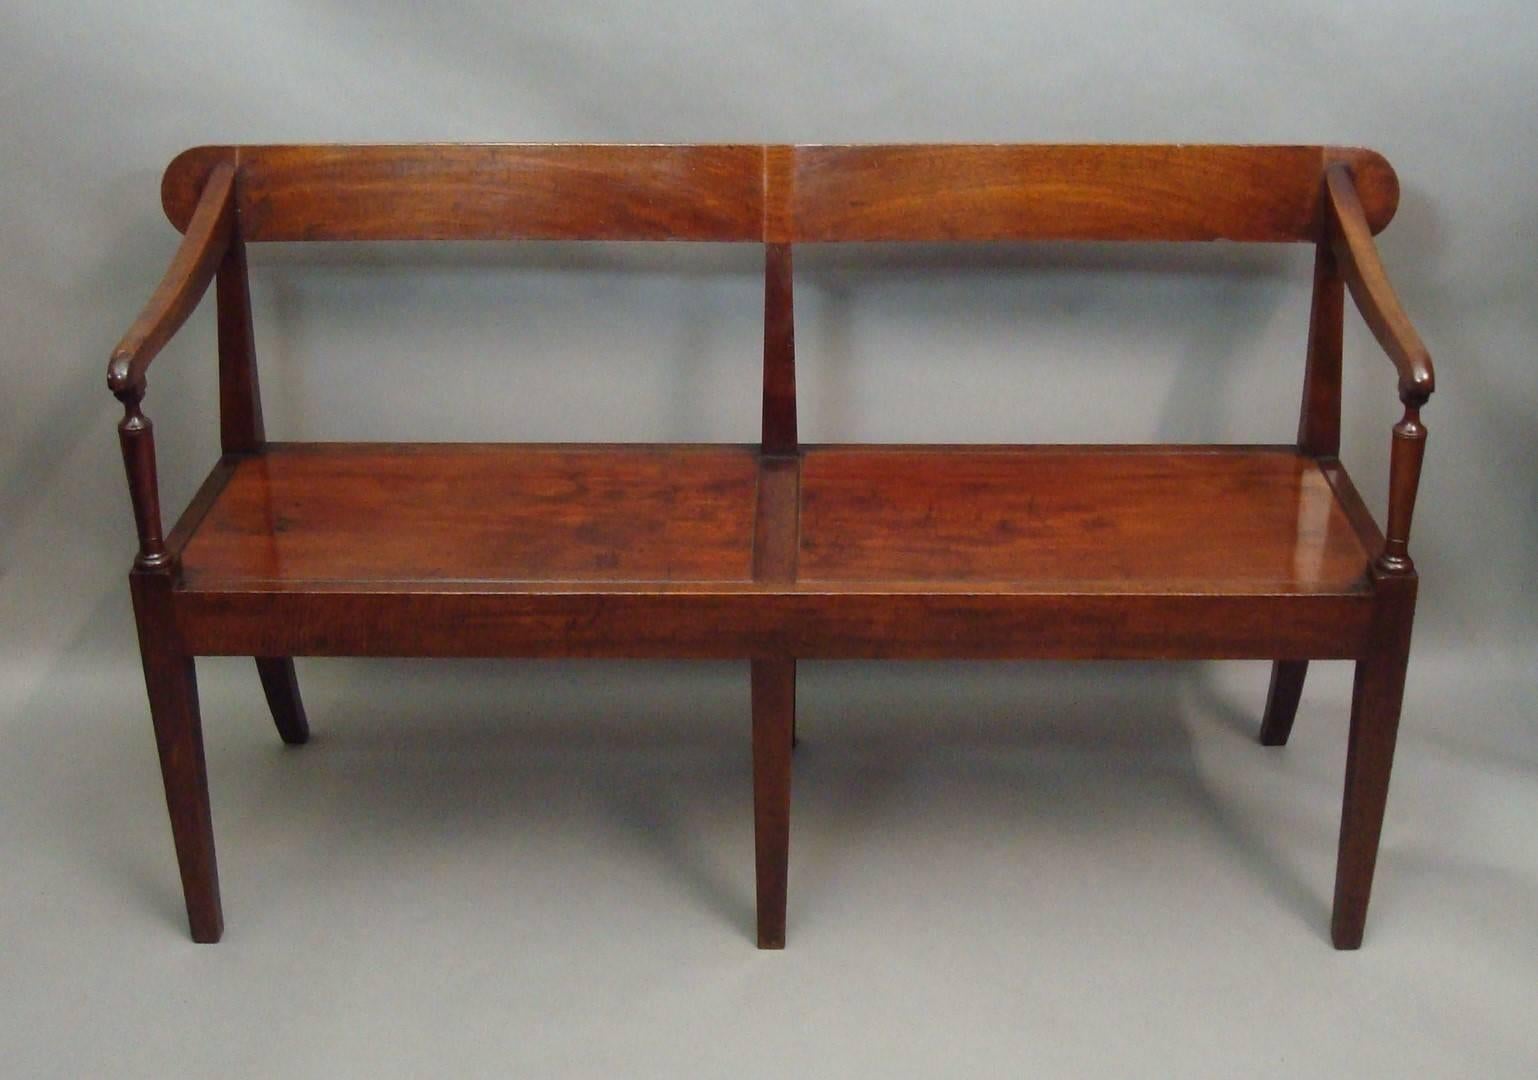 A good George III mahogany hall seat; the figured mahogany crest rail with a twin curve and rounded ends the swept arms, on slender turned supports, leading to the well figured double panel seat with a narrow reeded edge, set in a plain seat frame;